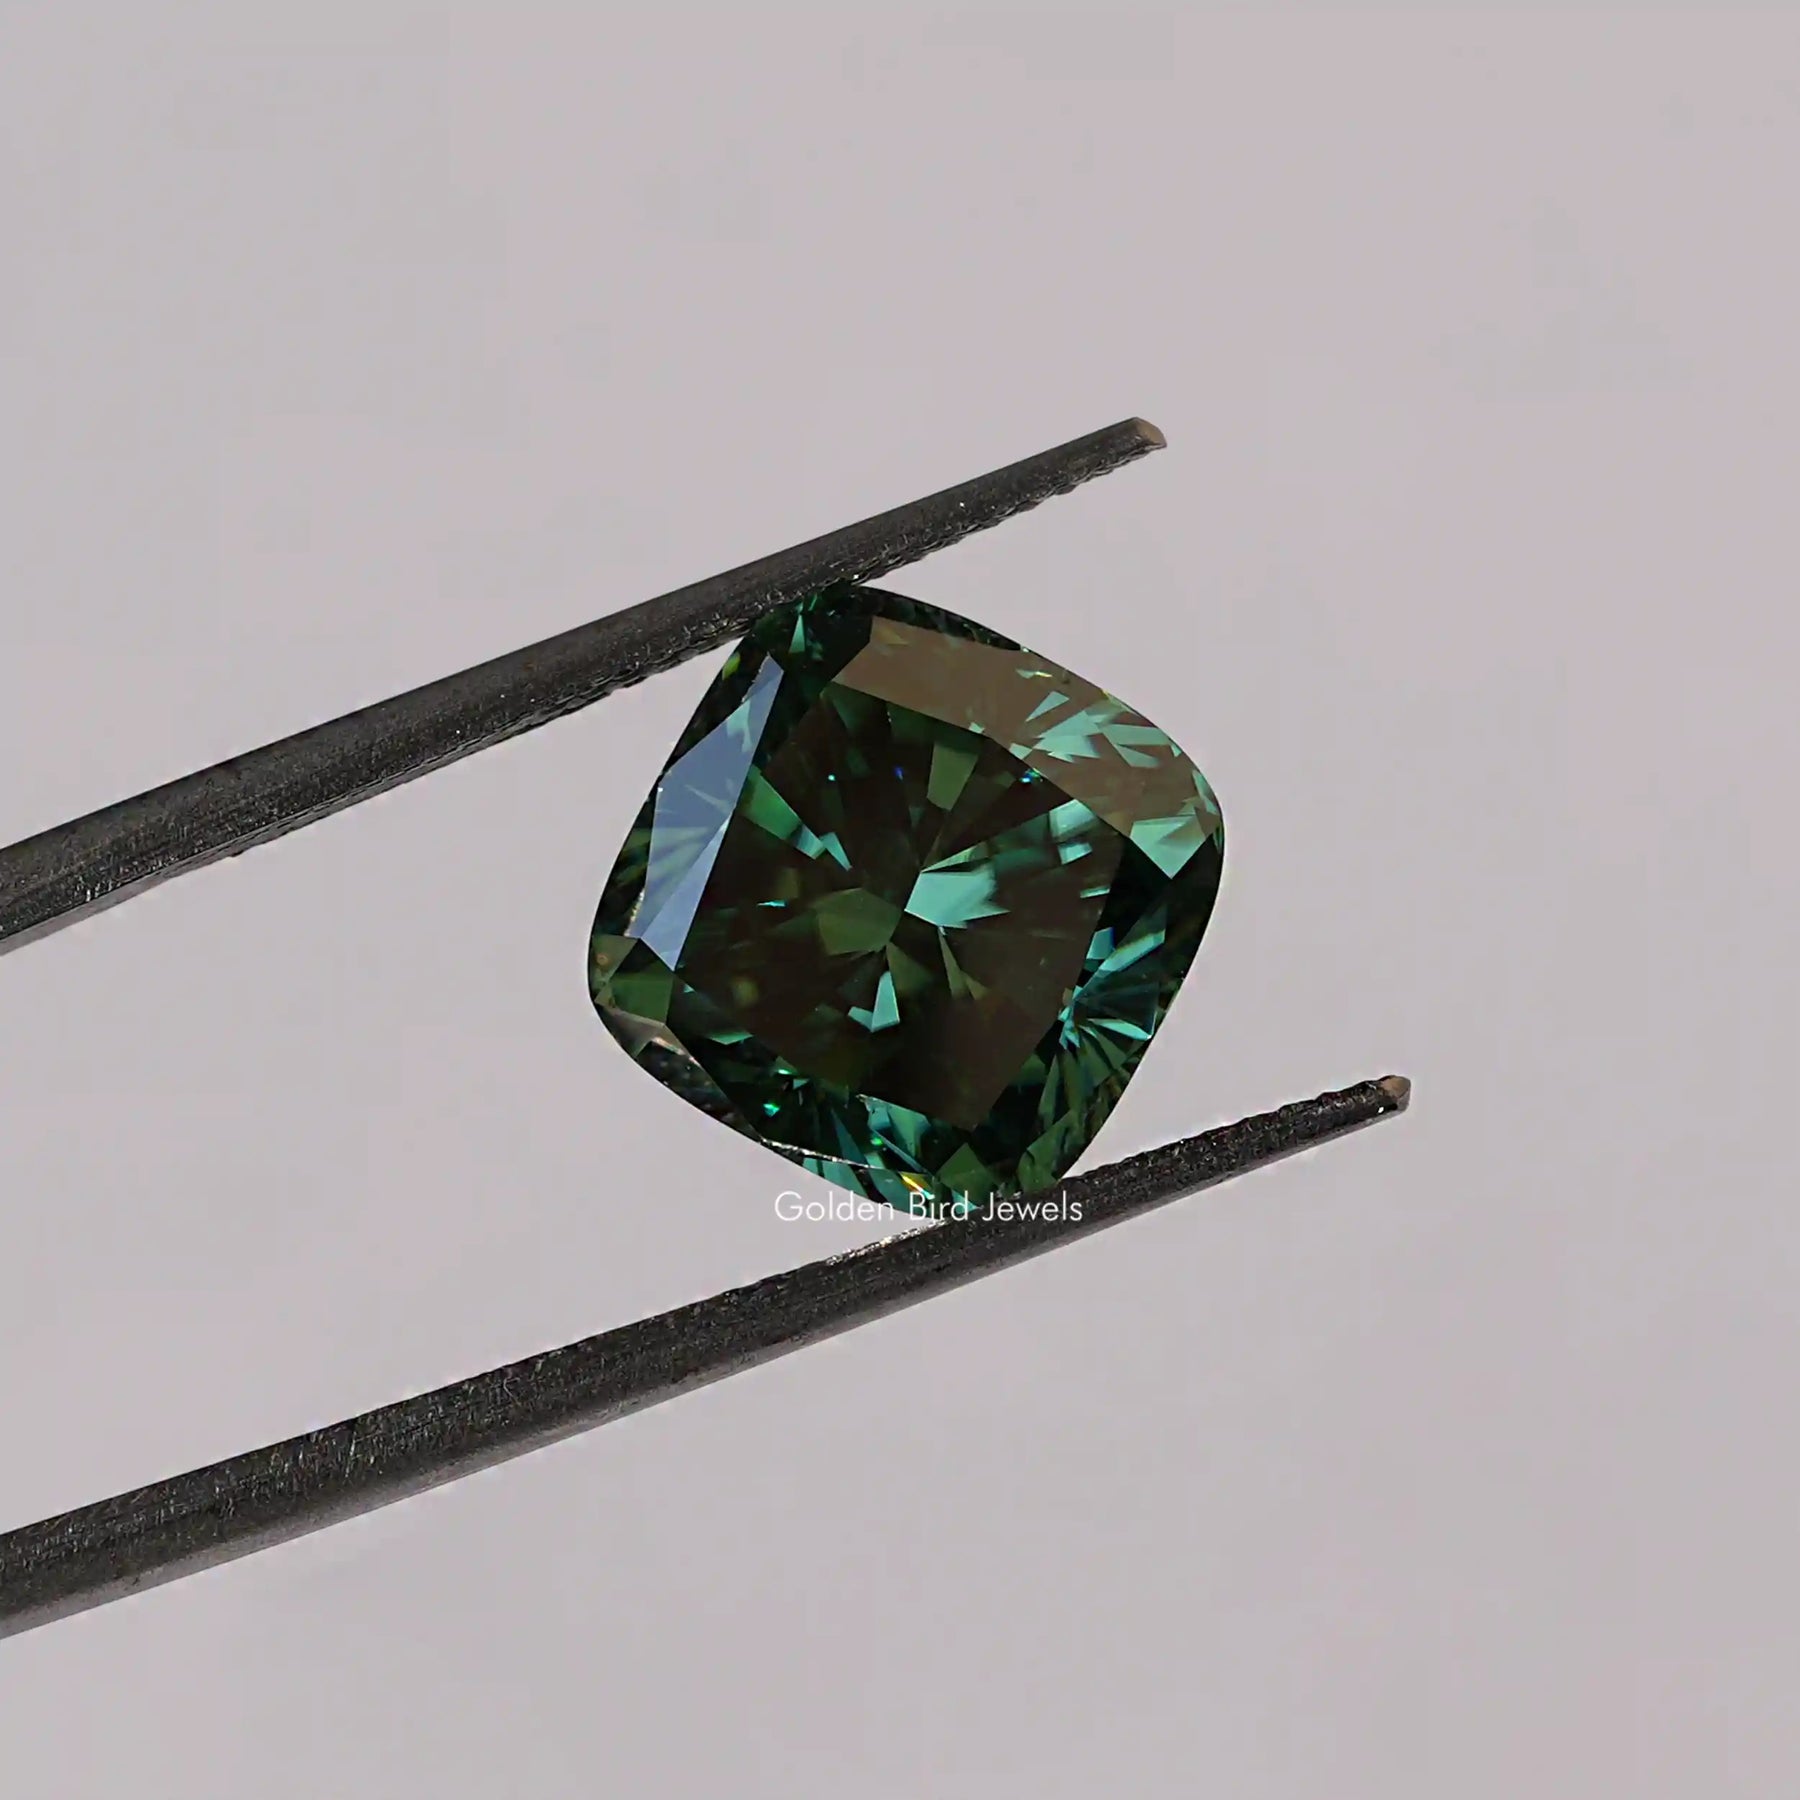 [This dark green cushion cut loose stone crafted with vs clarity]-[Golden Bird Jewels]